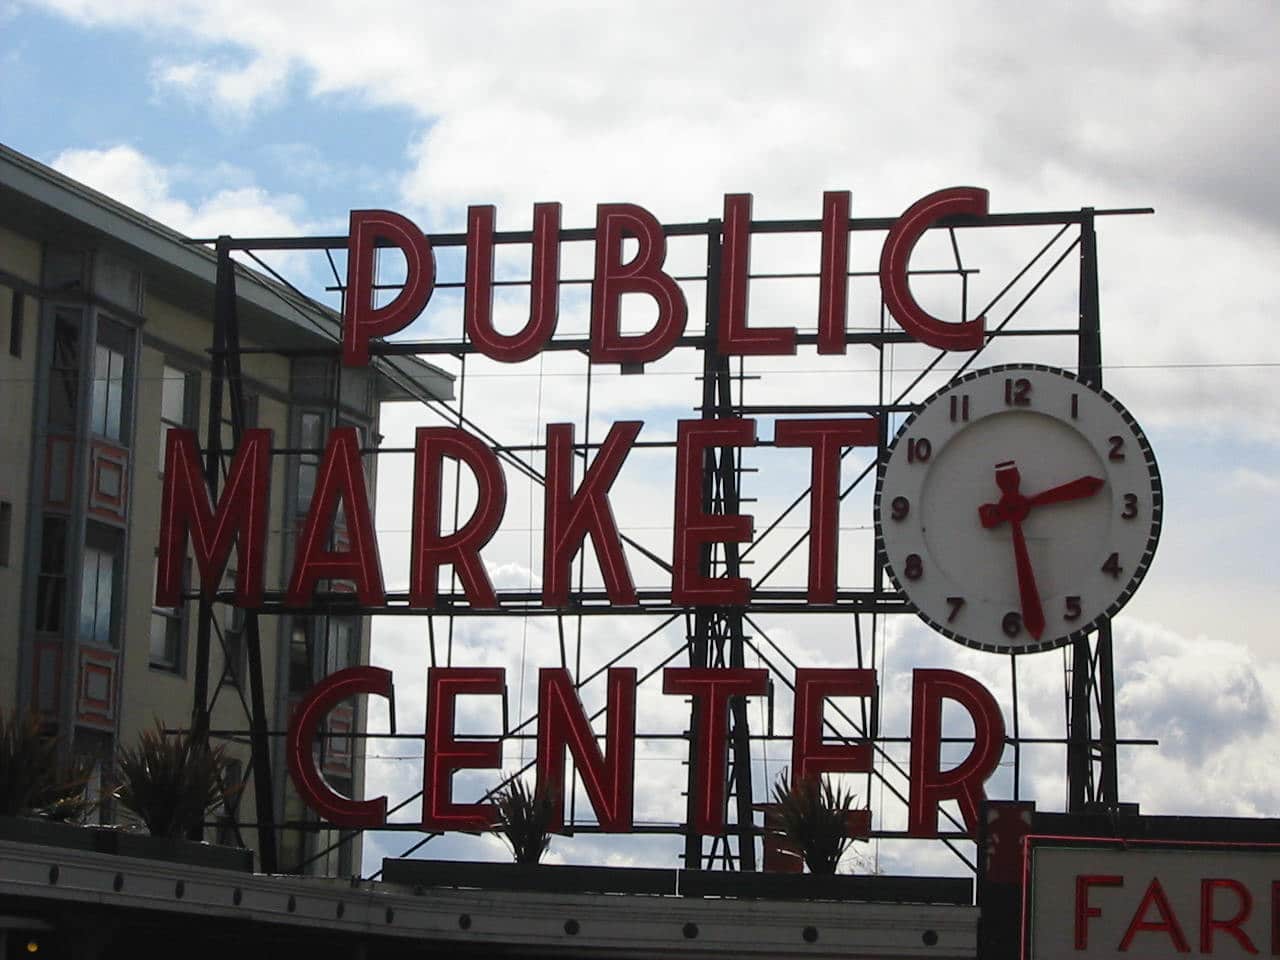 picture of Seattle Washington Public Market, home of Pikes Fish Market